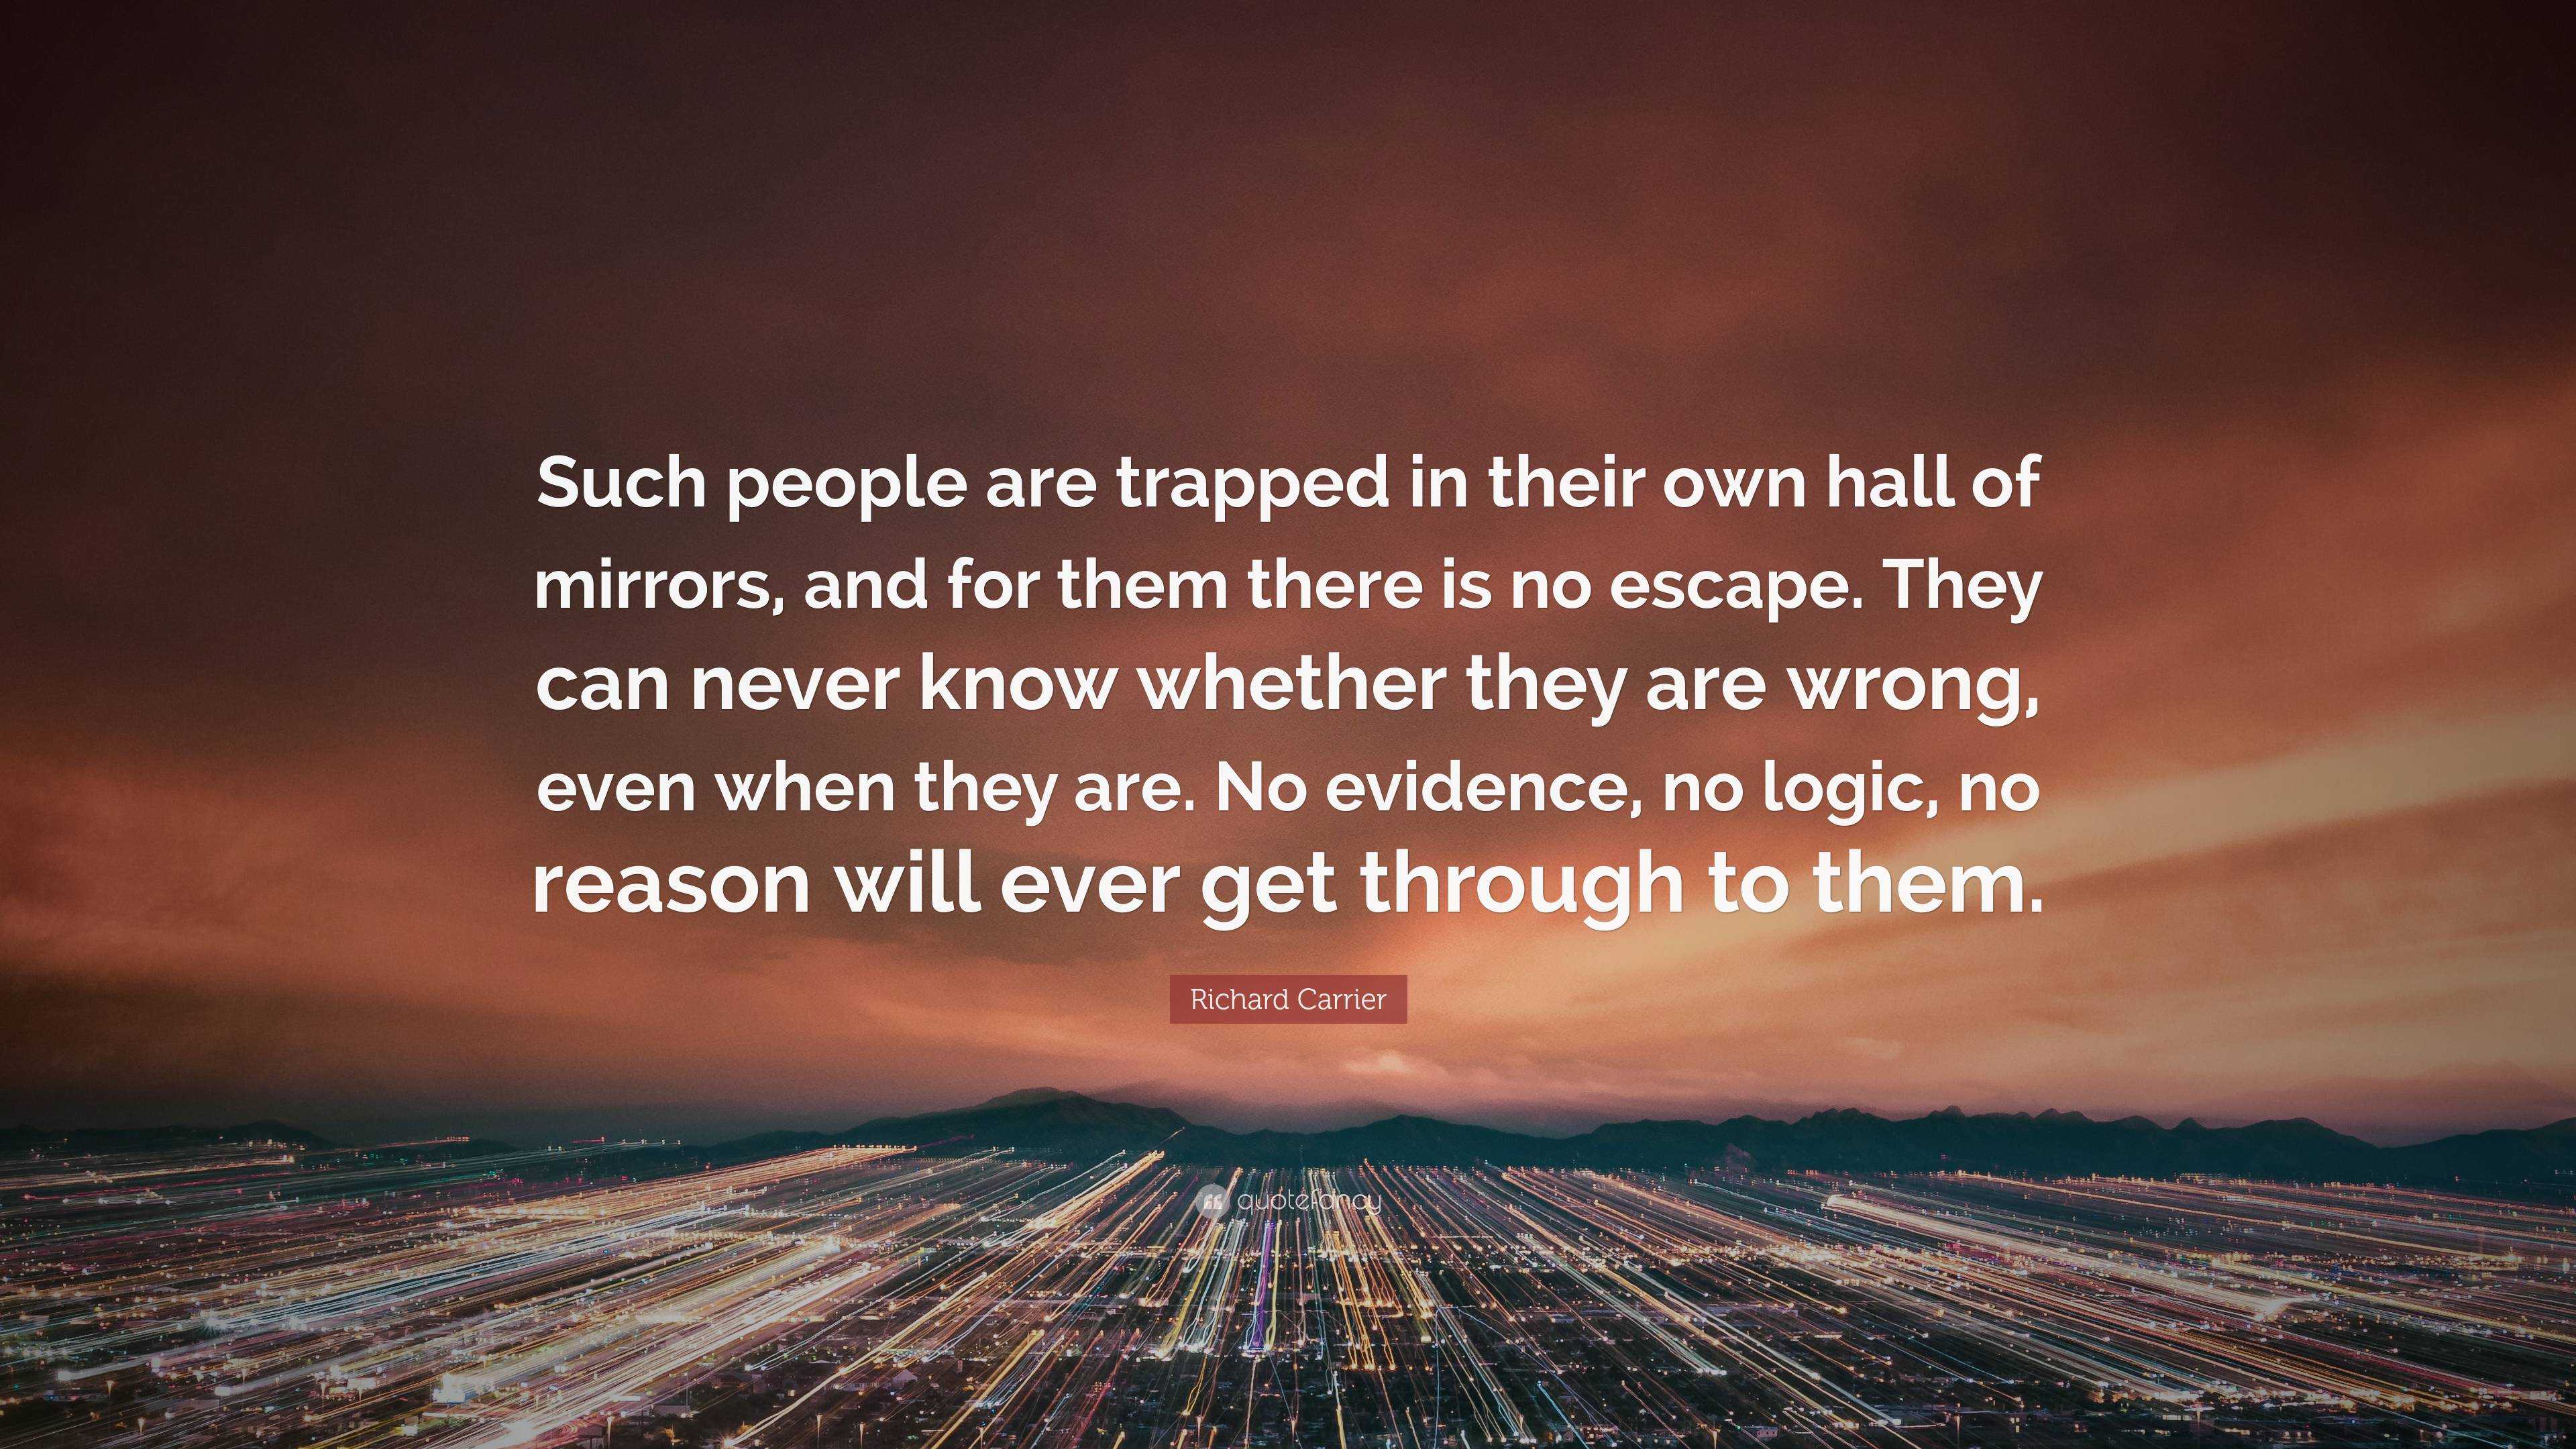 Richard Carrier Quote “Such people are trapped in their own hall of